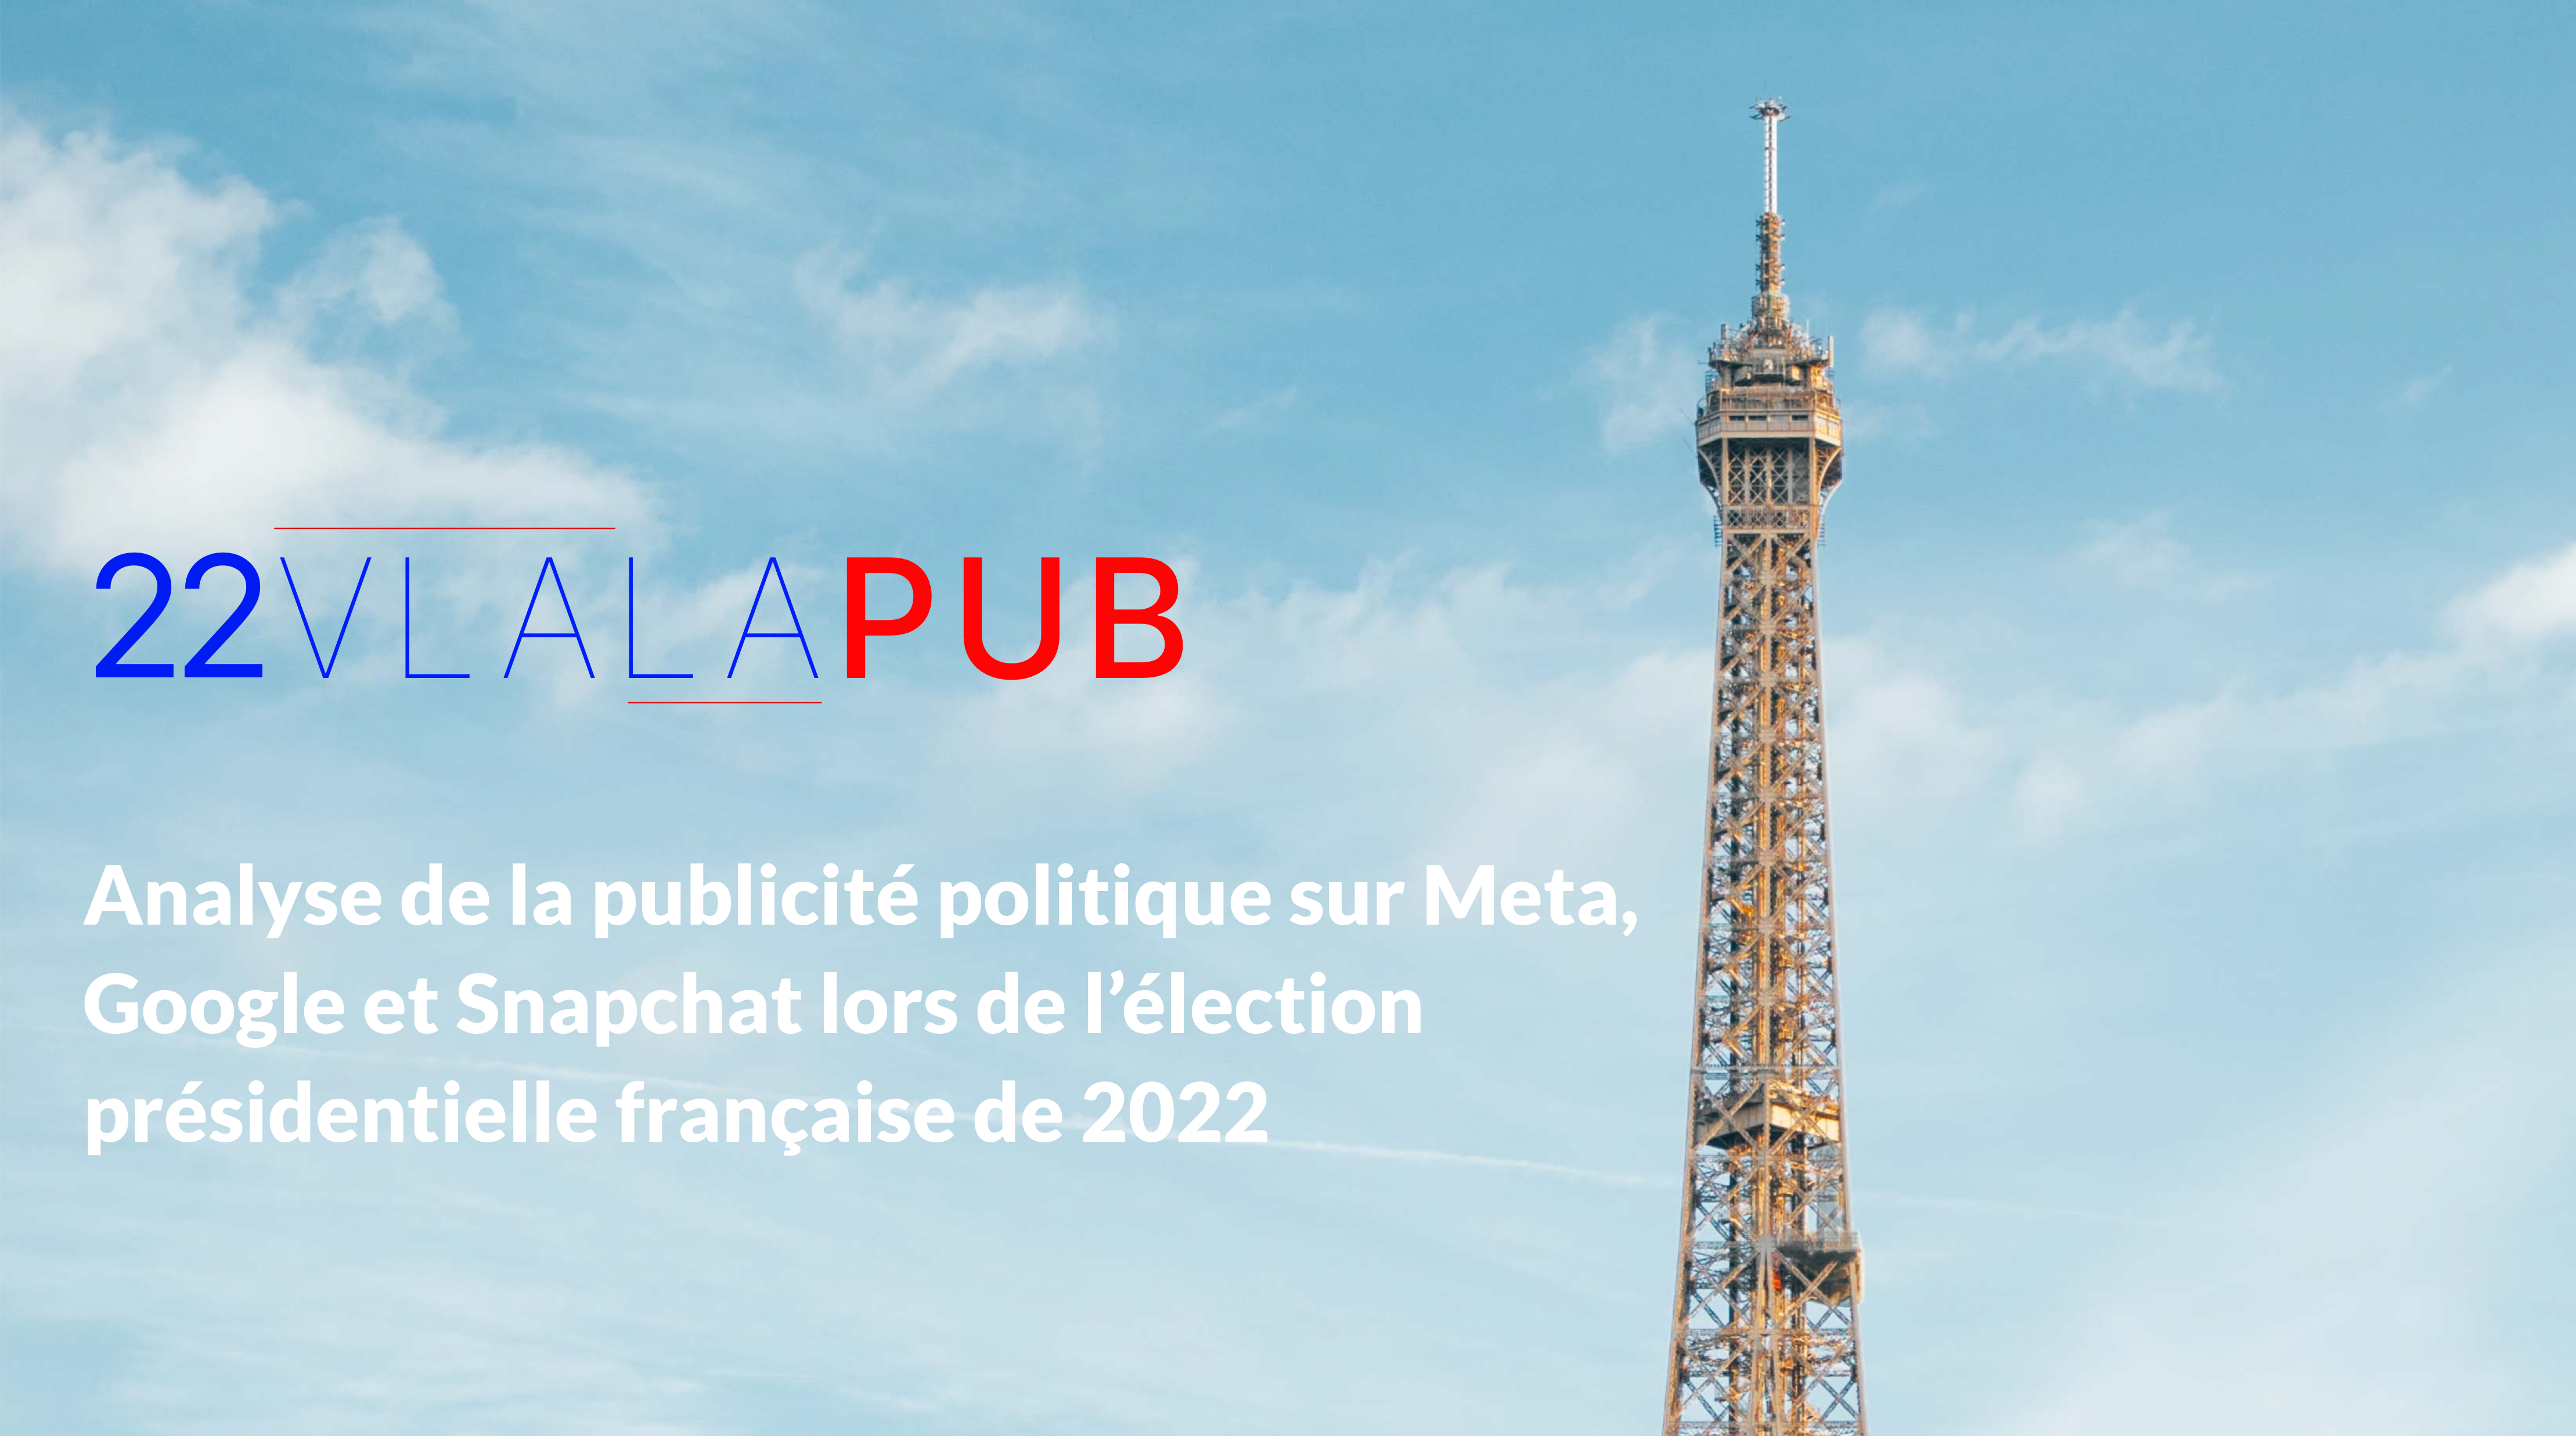 22vlalapub: an analysis of political advertising on Meta, Google and Snapchat during French presidential election